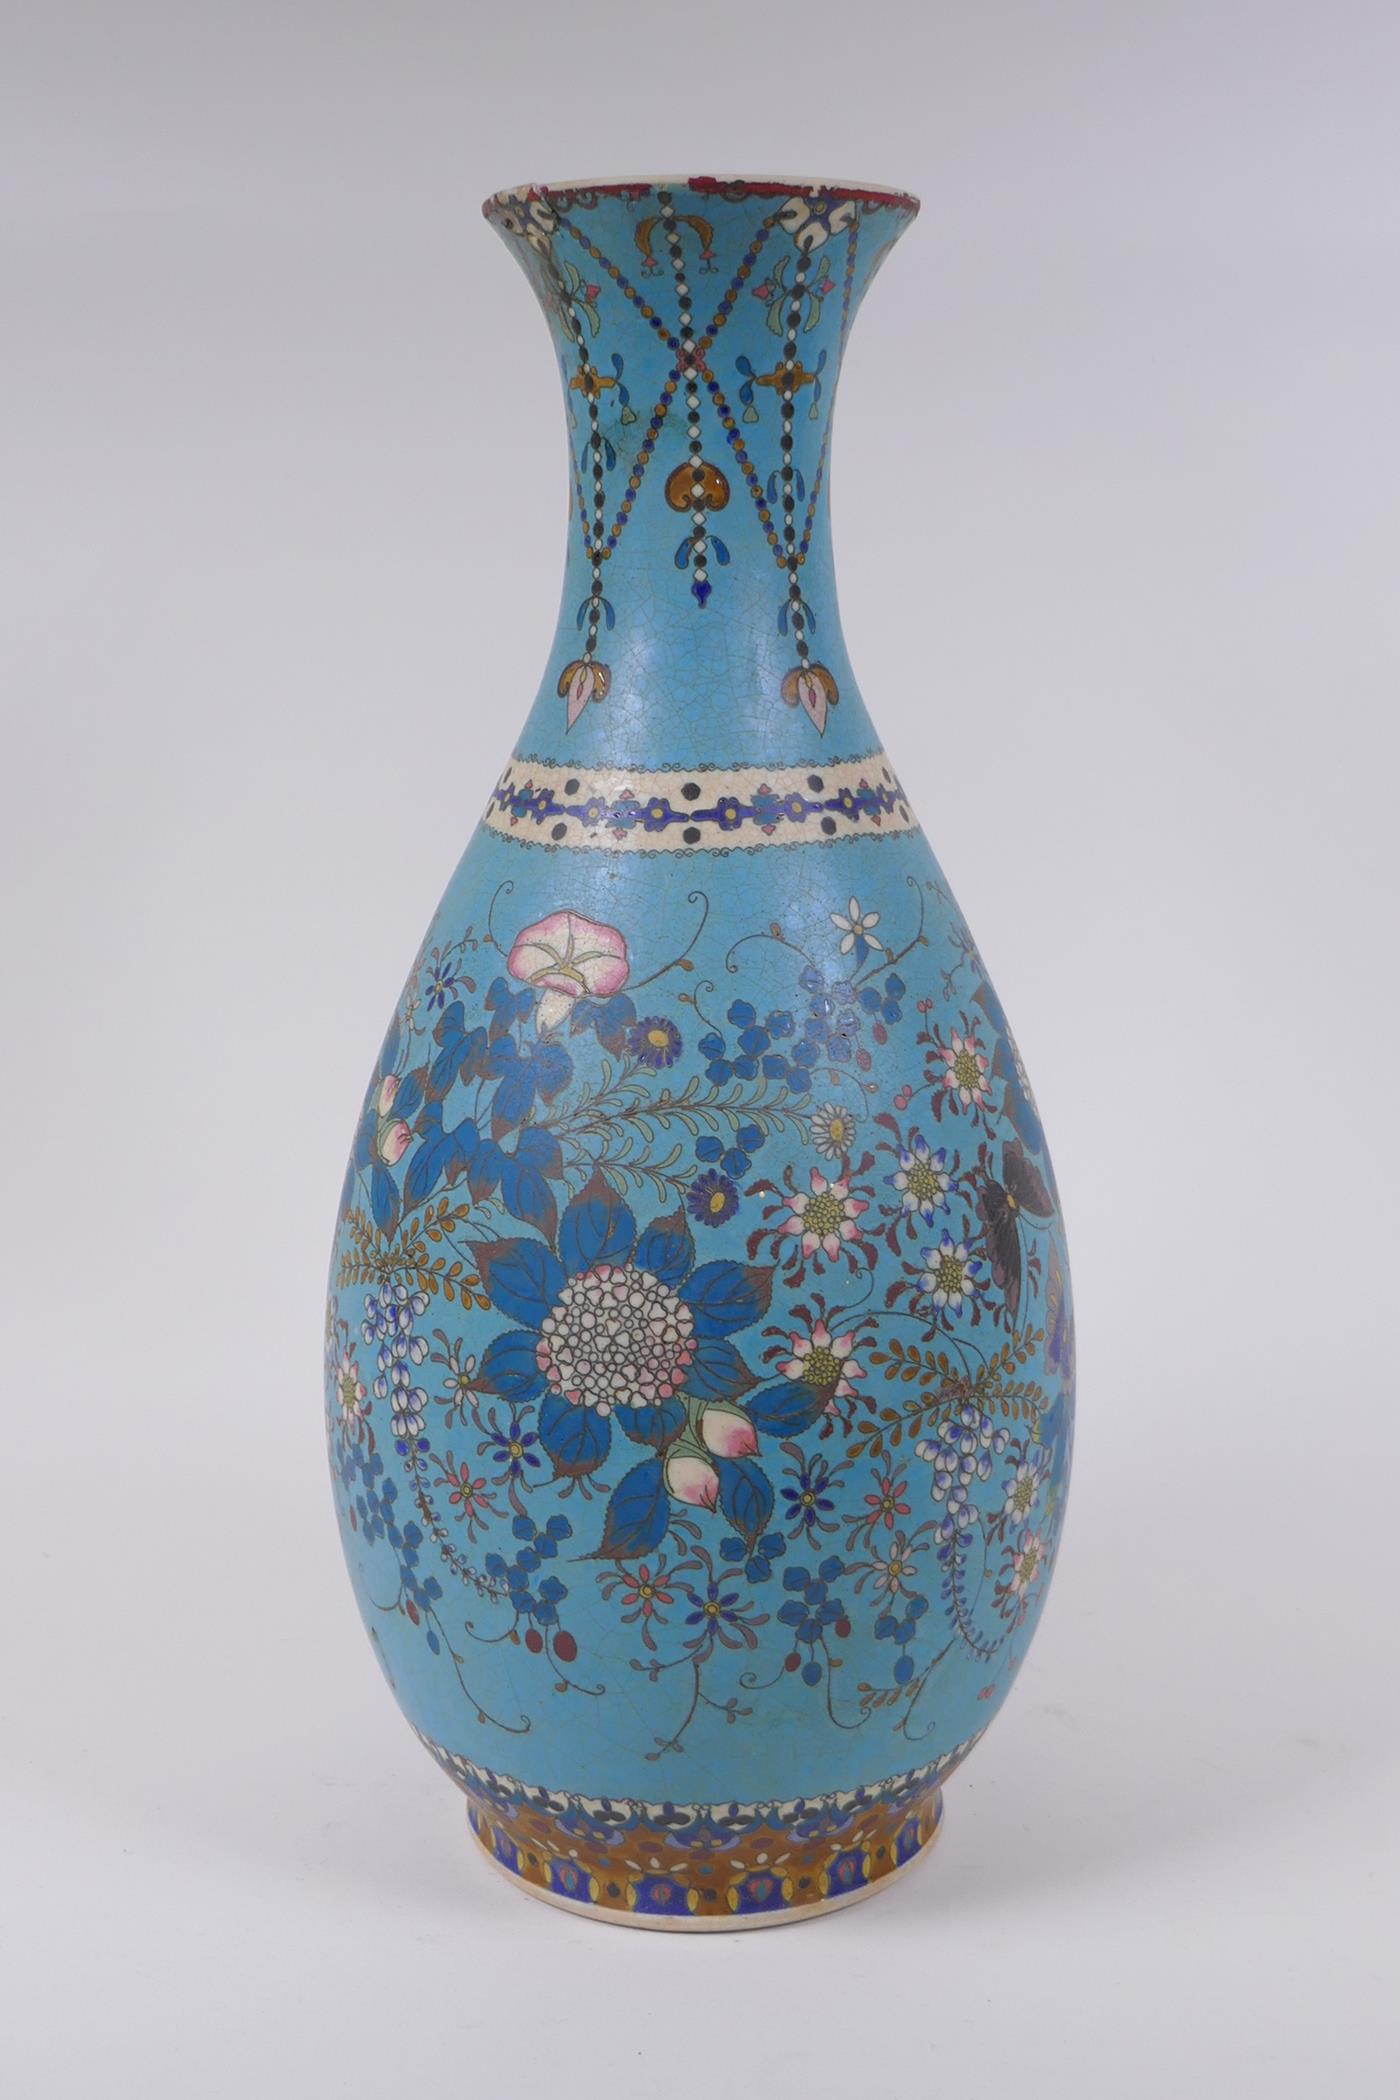 A Japanese Meiji period cloisonne on porcelain pear shaped vase with floral and butterfly - Image 4 of 8